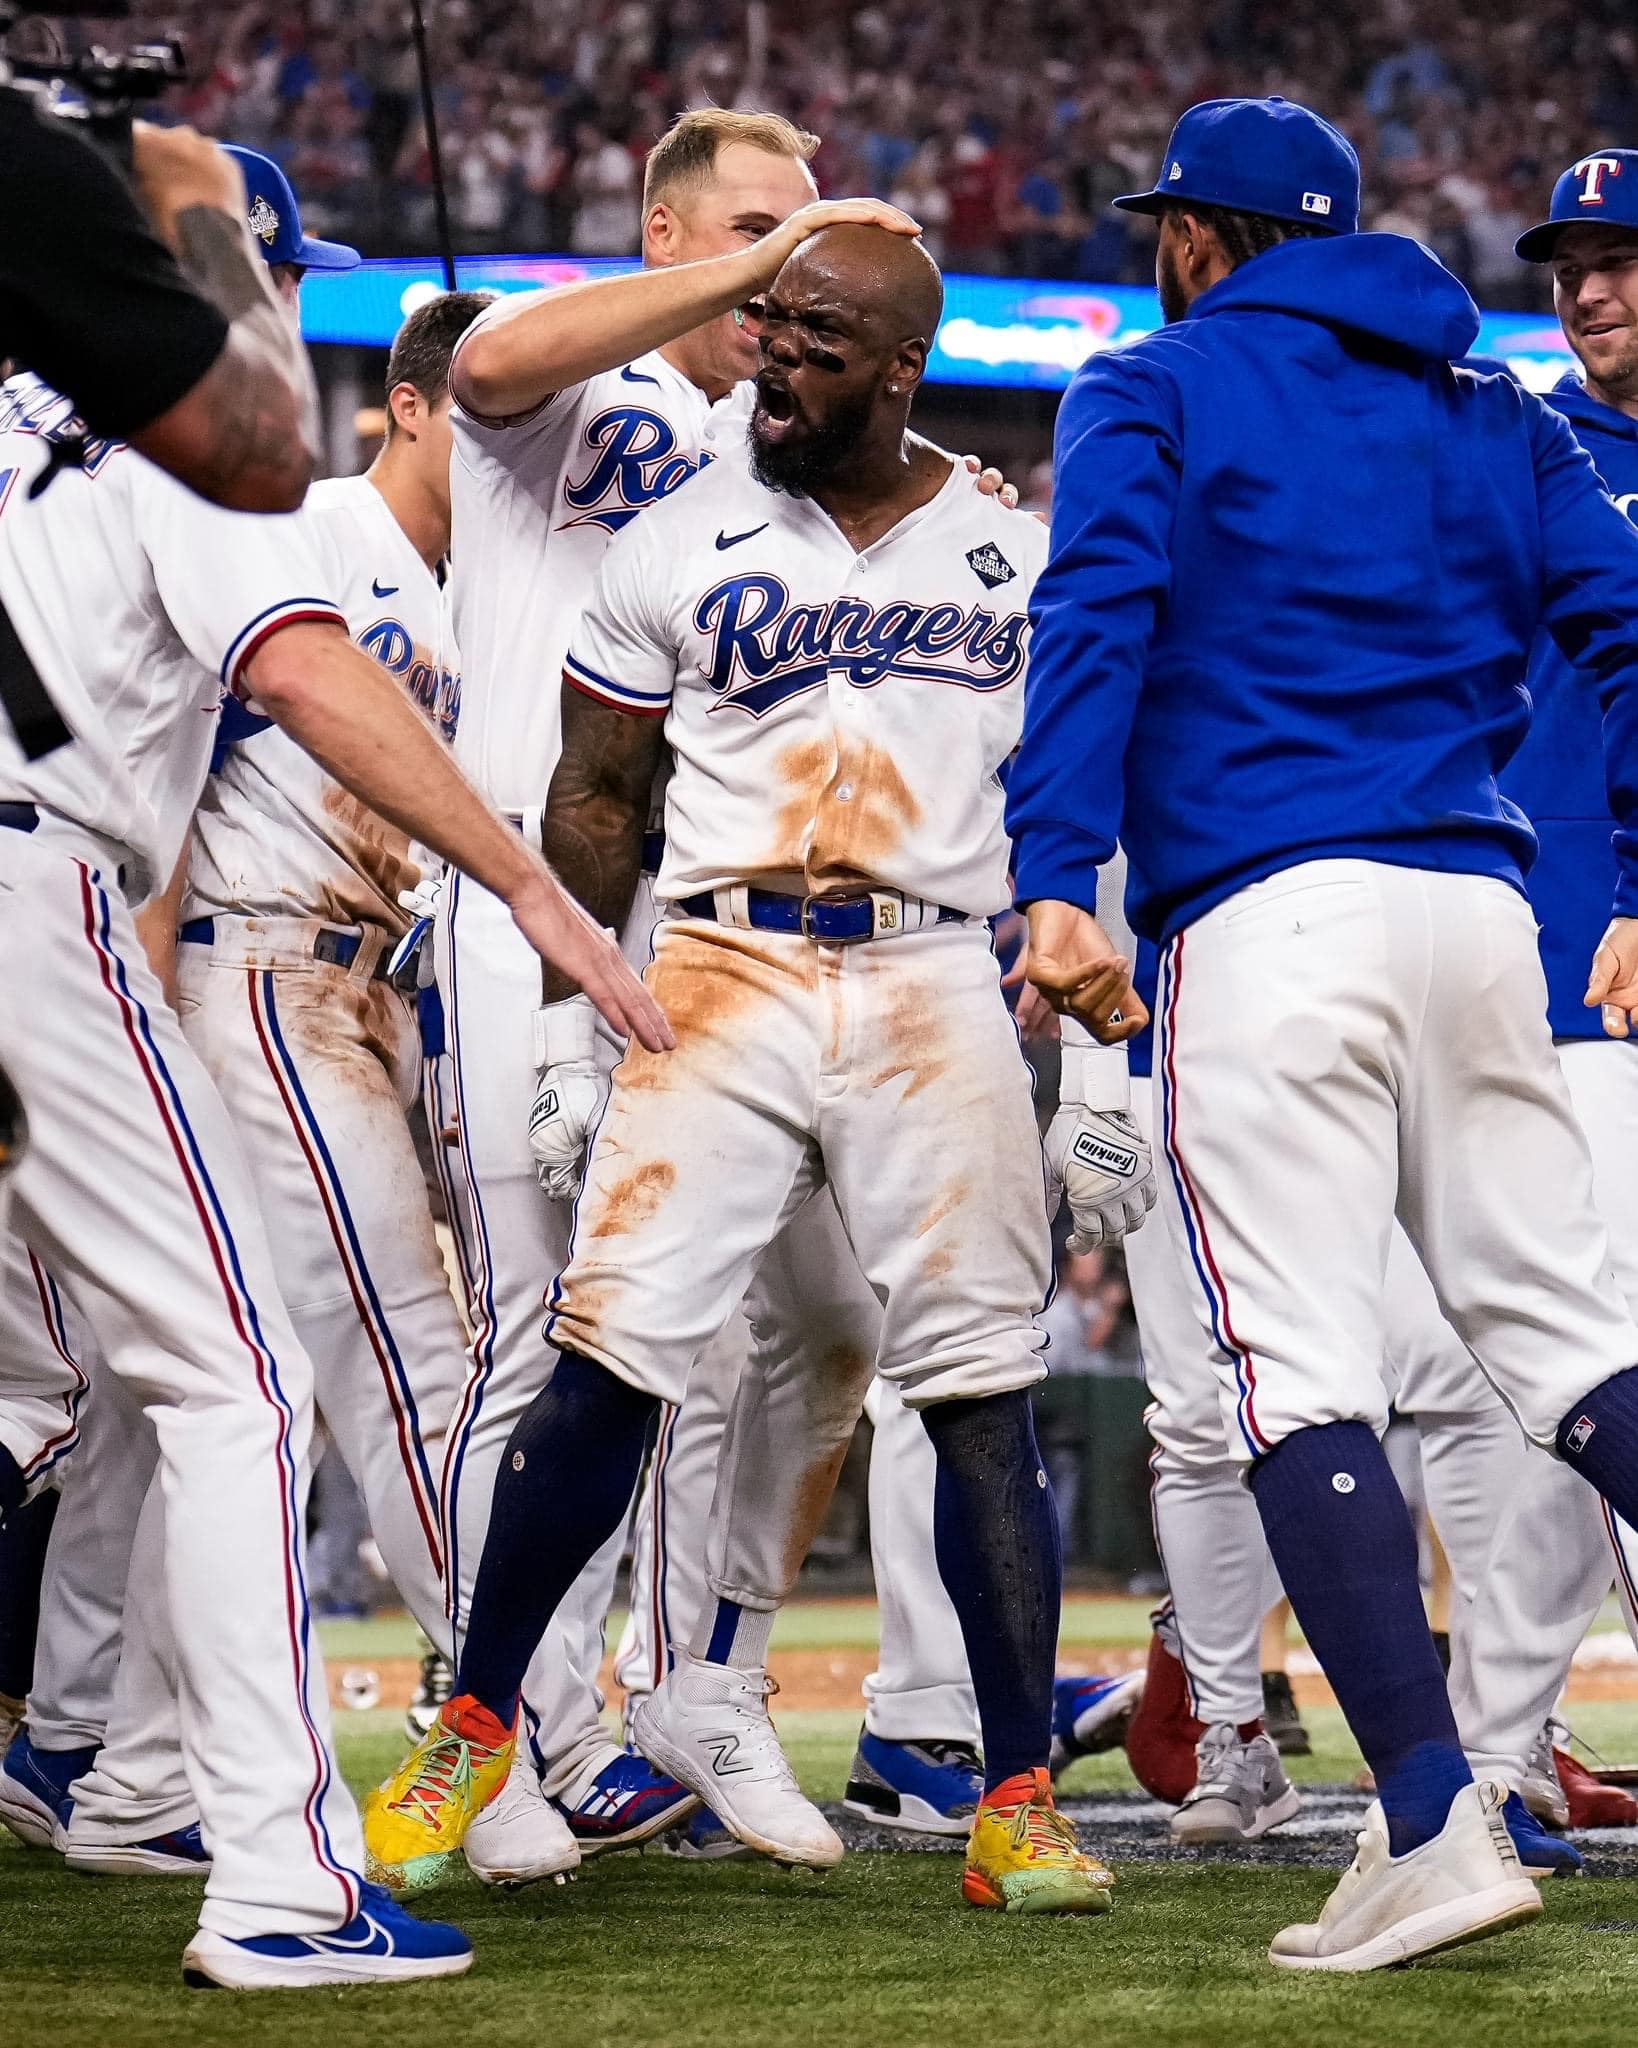 Adolis Garcia’s Walkoff Home Run Won Rangers The First Game Of The WorldSeries Against Arizona